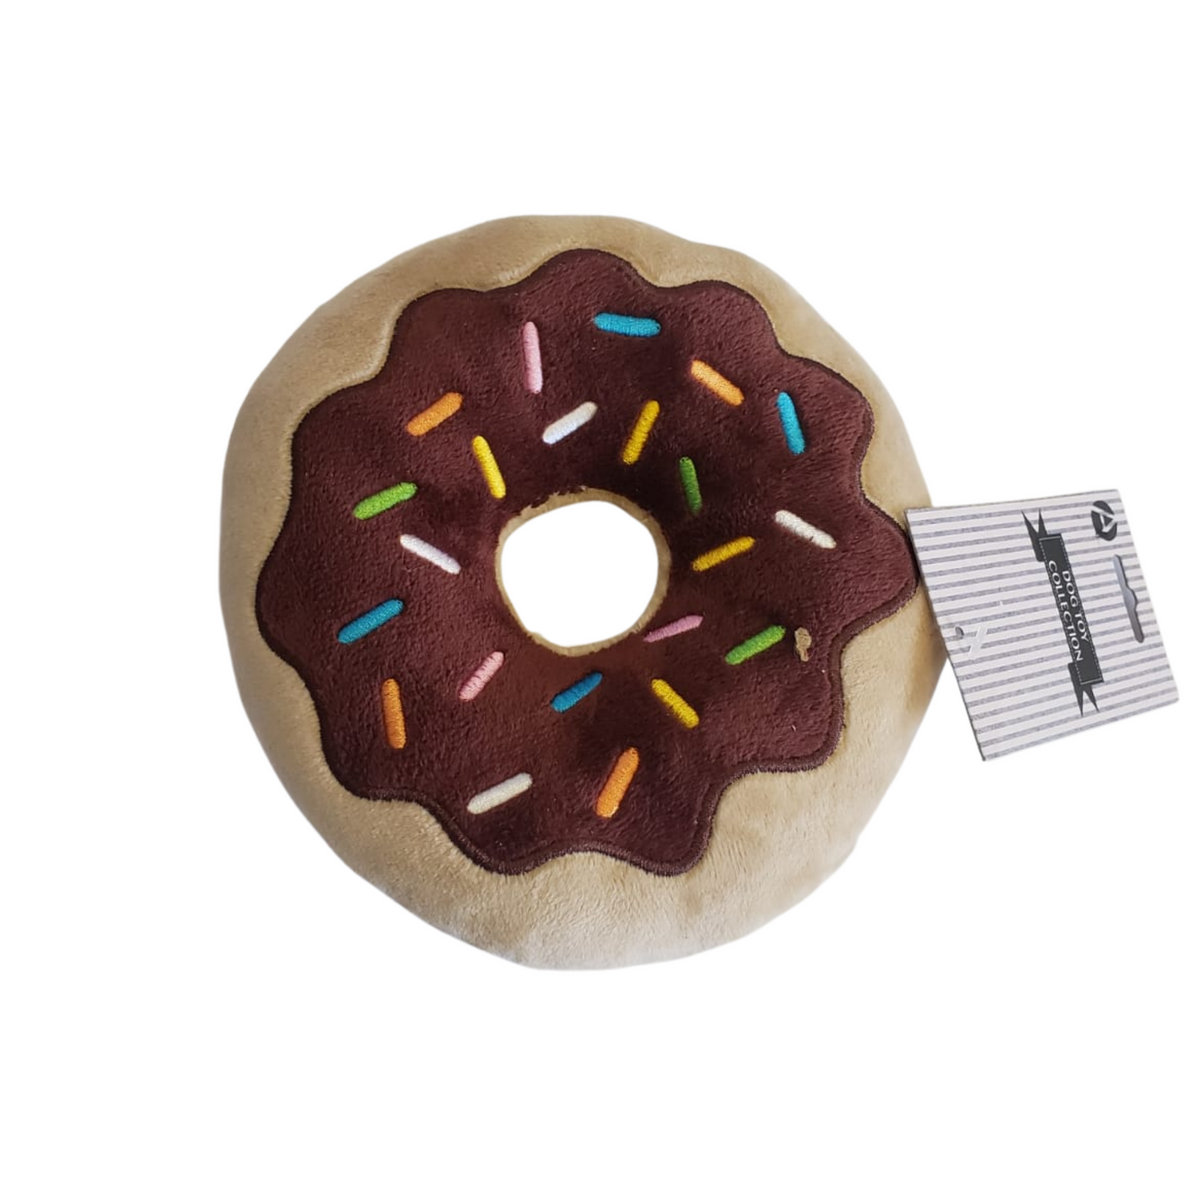 Chocolate Donut Plush Dog Toy by American Pet Supplies